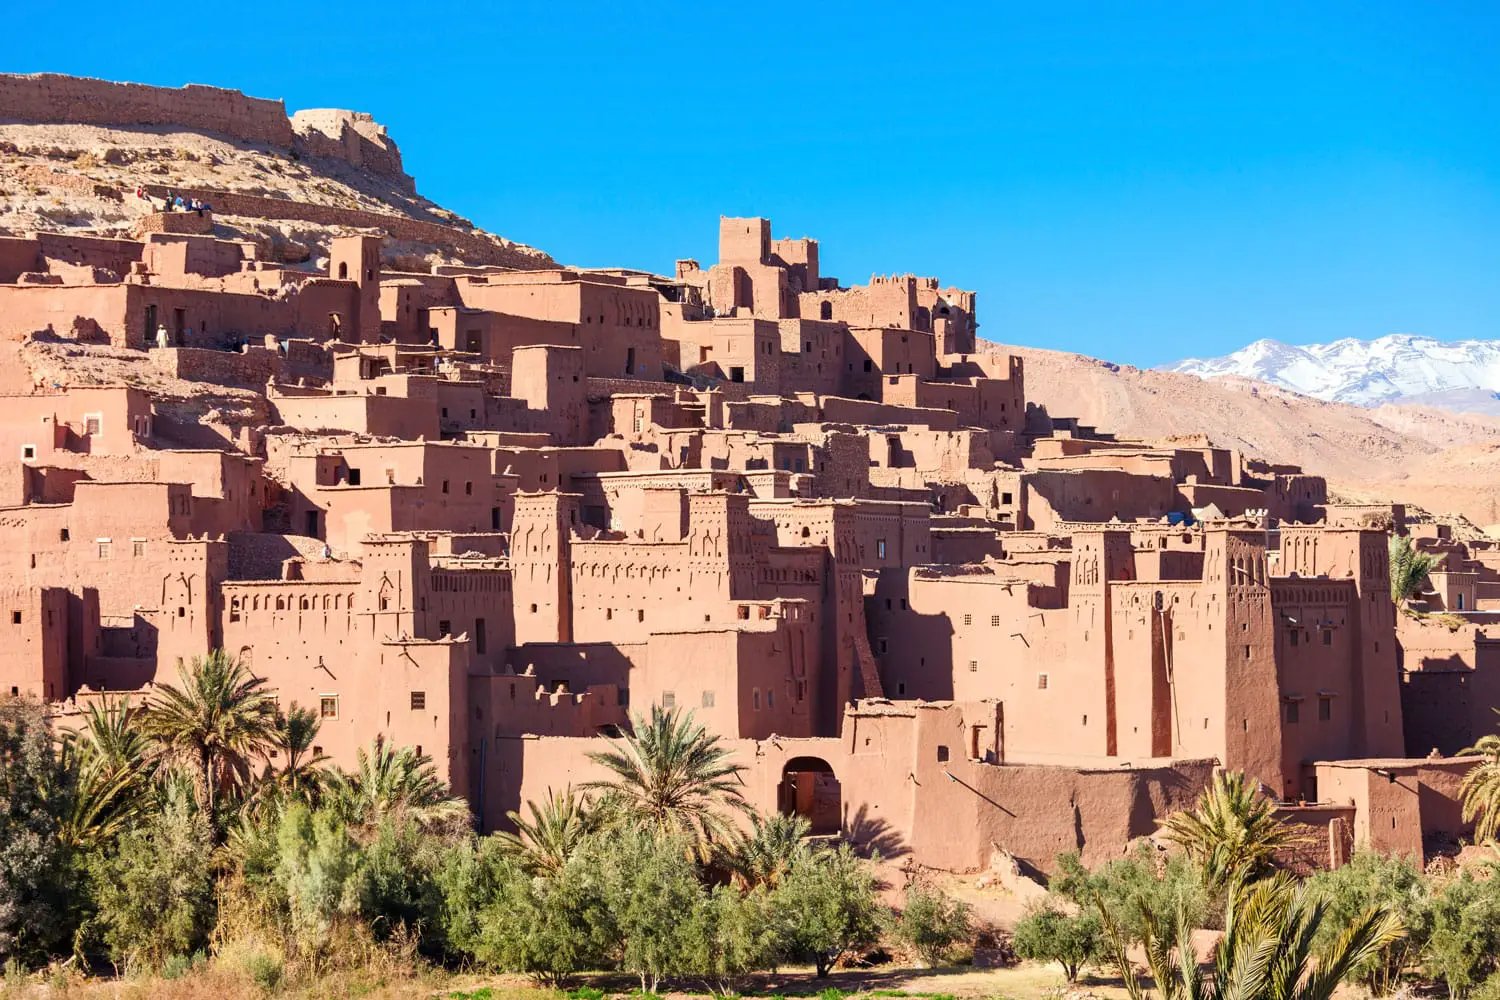 Ait Ben Haddou (or Ait Benhaddou) is a fortified city along the former caravan route between the Sahara and Marrakech in Morocco